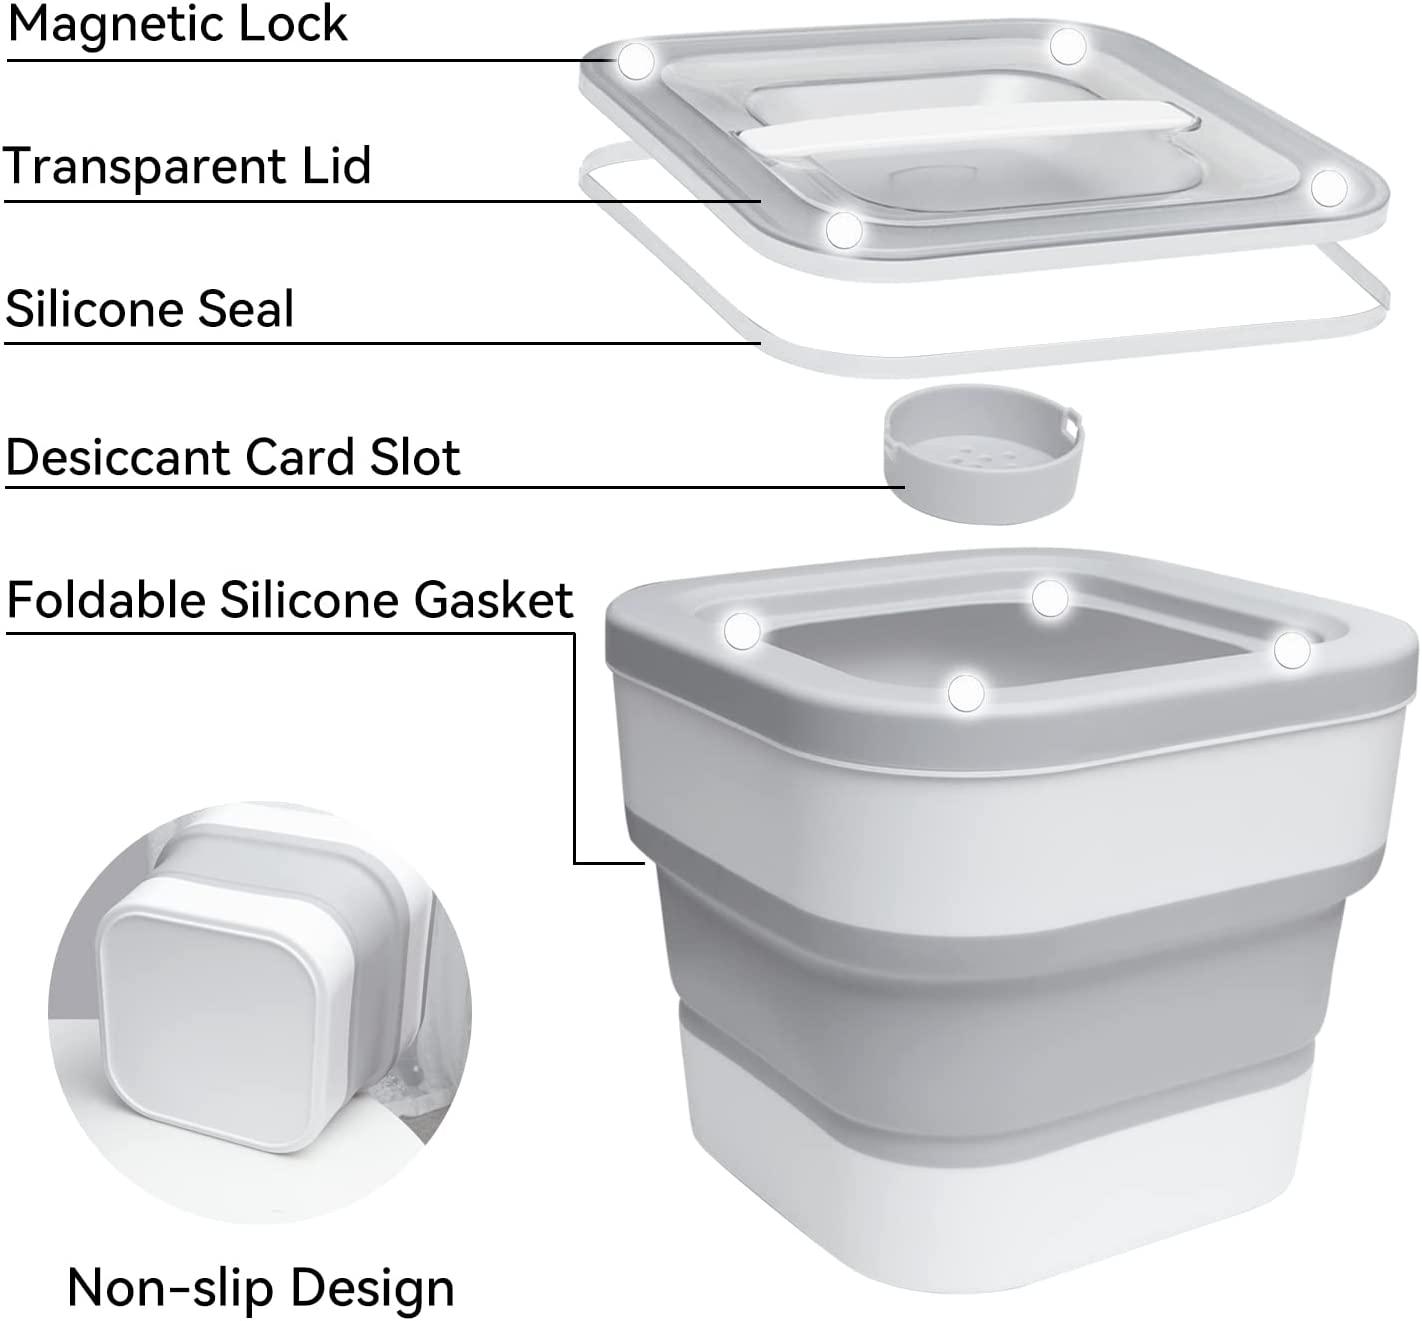 Collapsible Dog Food Storage Container, 10-13LB Airtight Dog Food Container  Bin with Magnetic Lid, Foldable Pet Food Storage Container with Measuring  Cup and Silicone Bowl, Rice Storage Bin, White